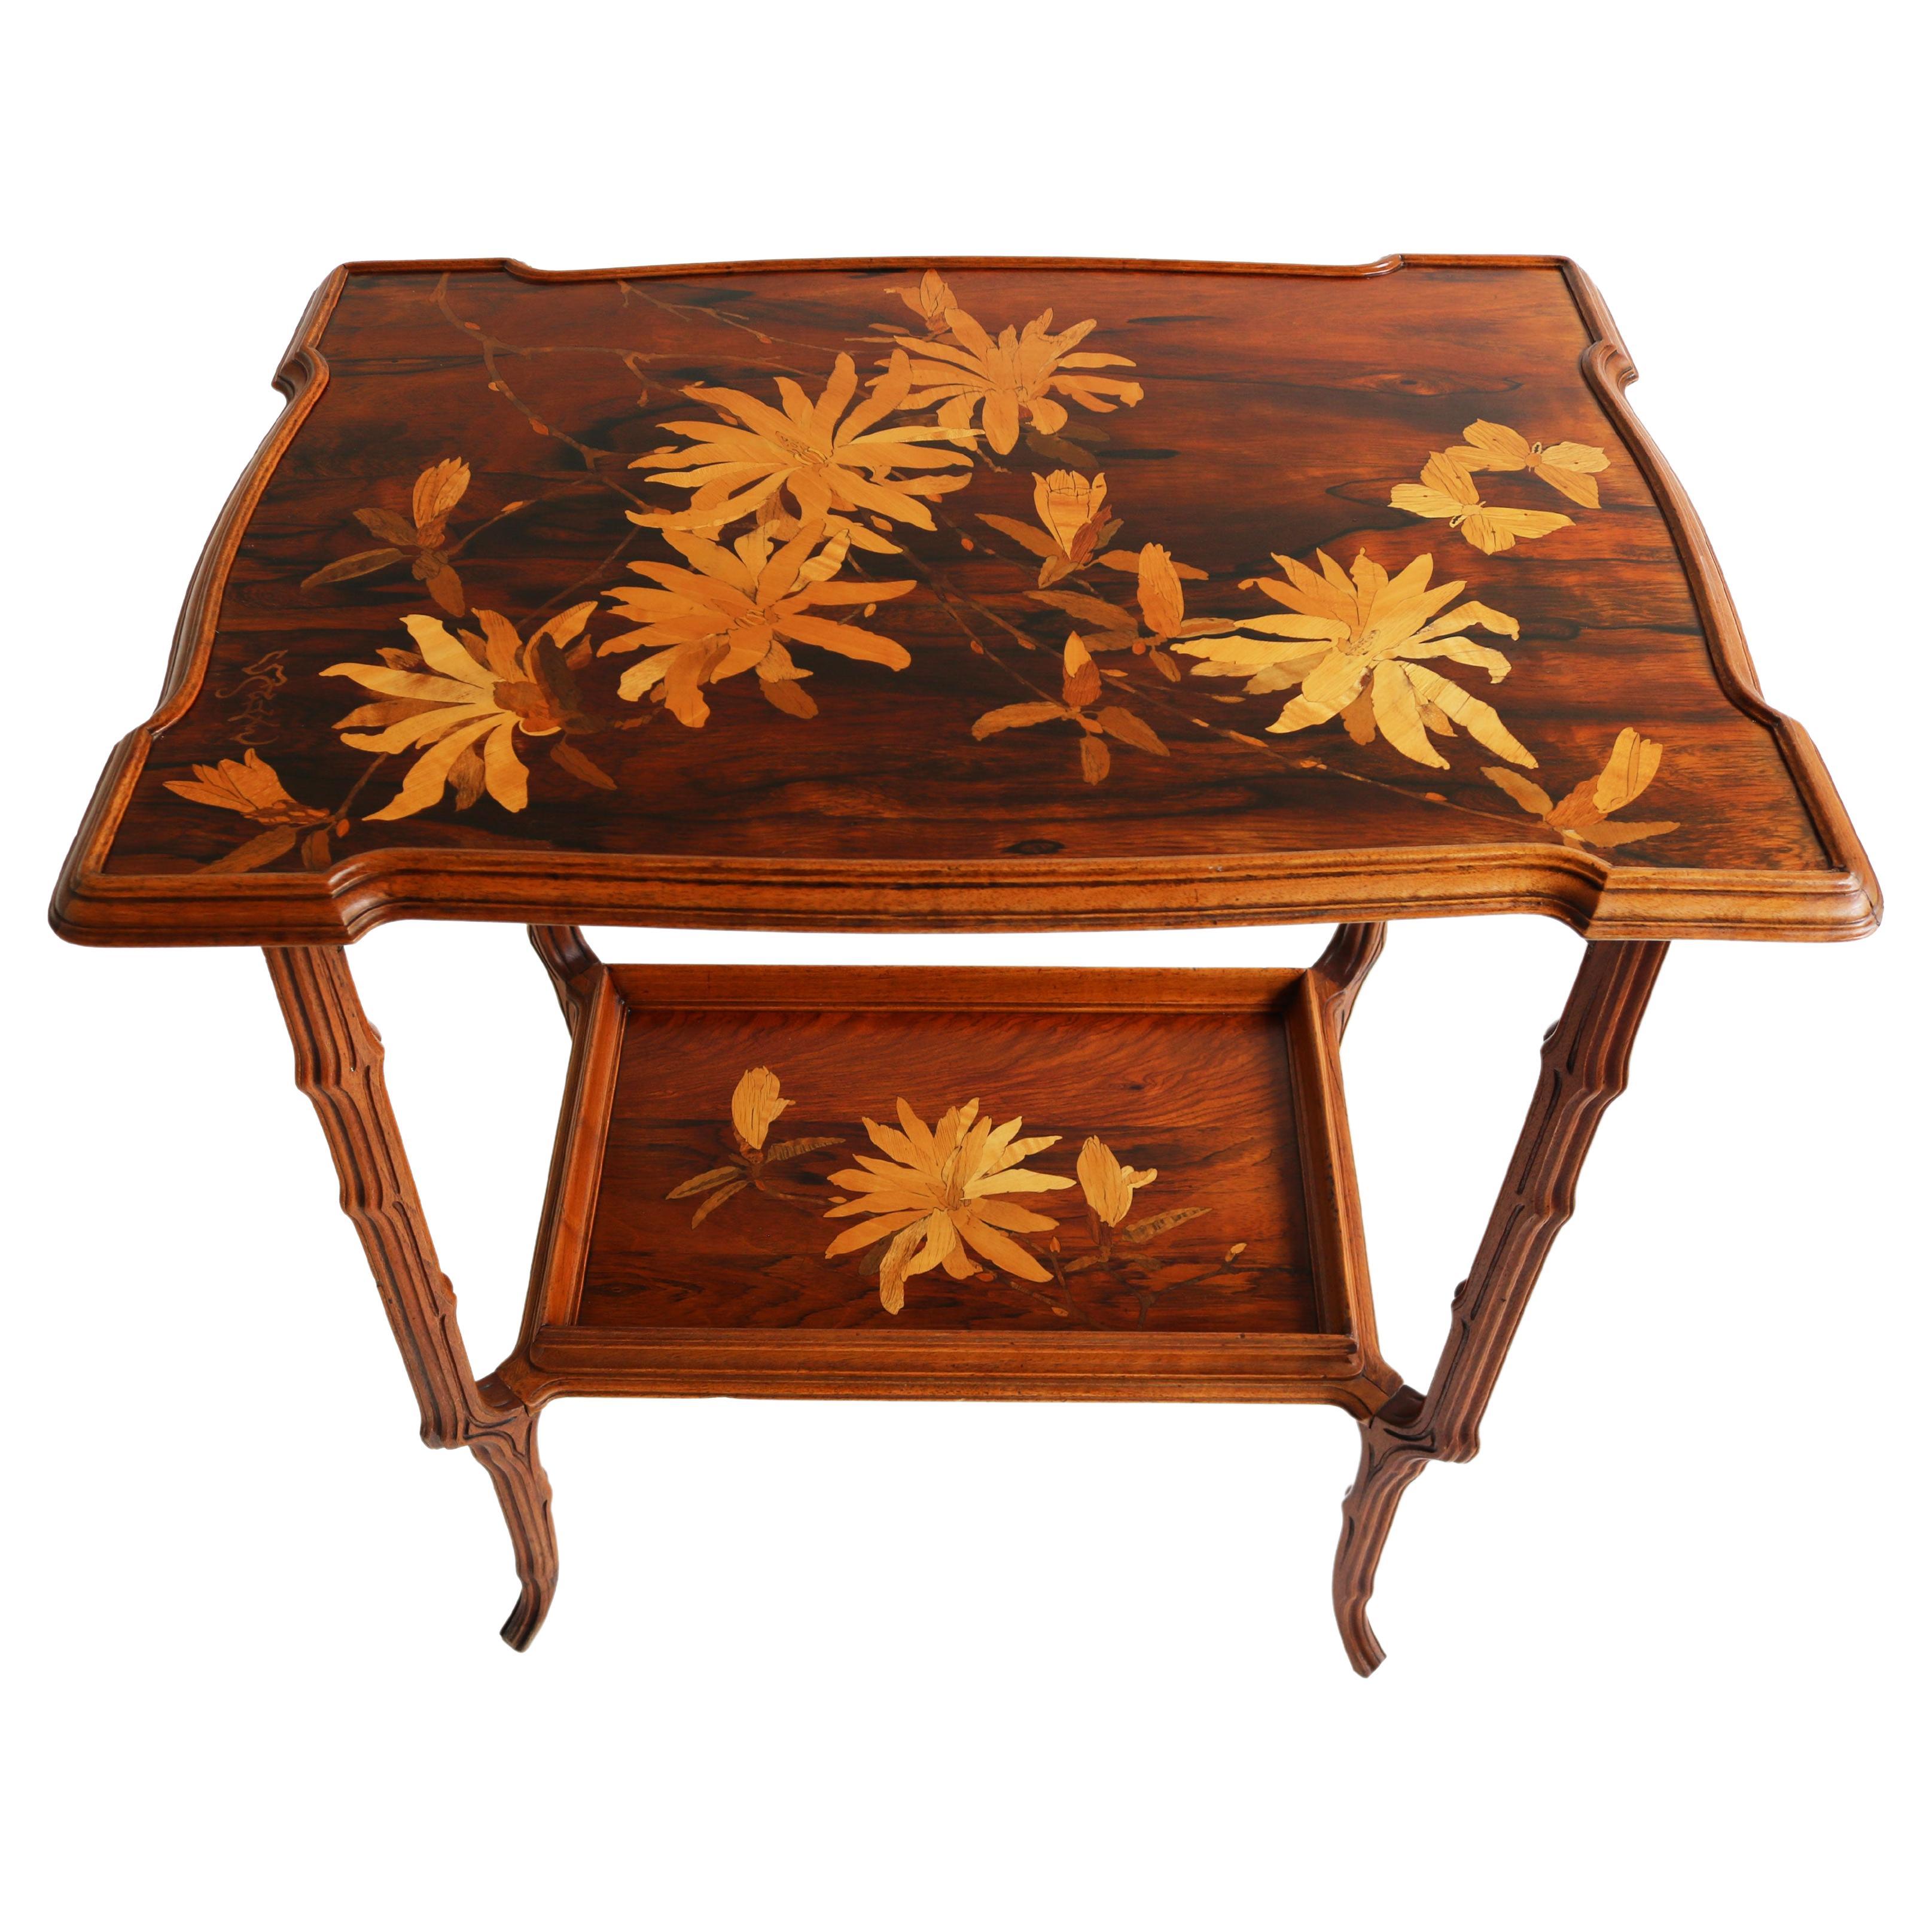 Original French Art Nouveau Marquetry Table ''Japonisme'' by Emile Galle 1900 For Sale